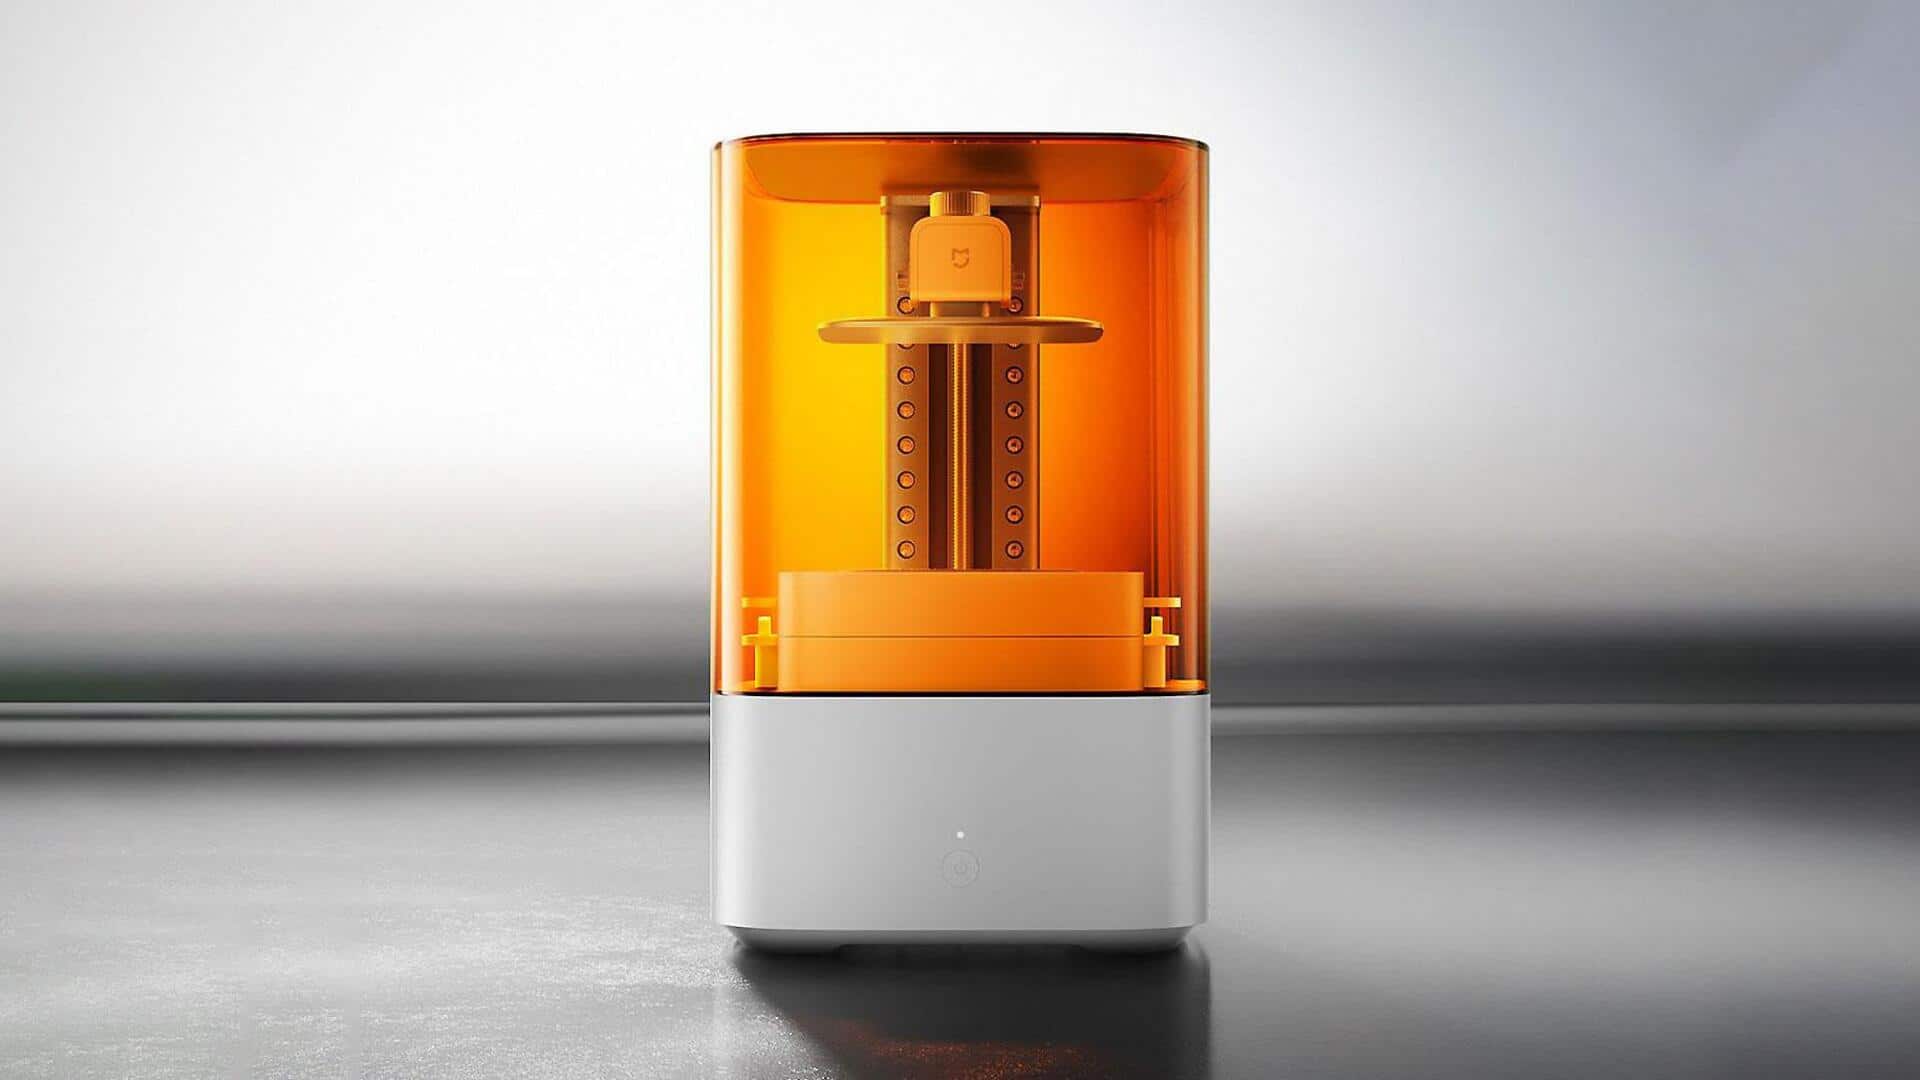 Xiaomi launches compact 3D printer with printing and curing capabilities